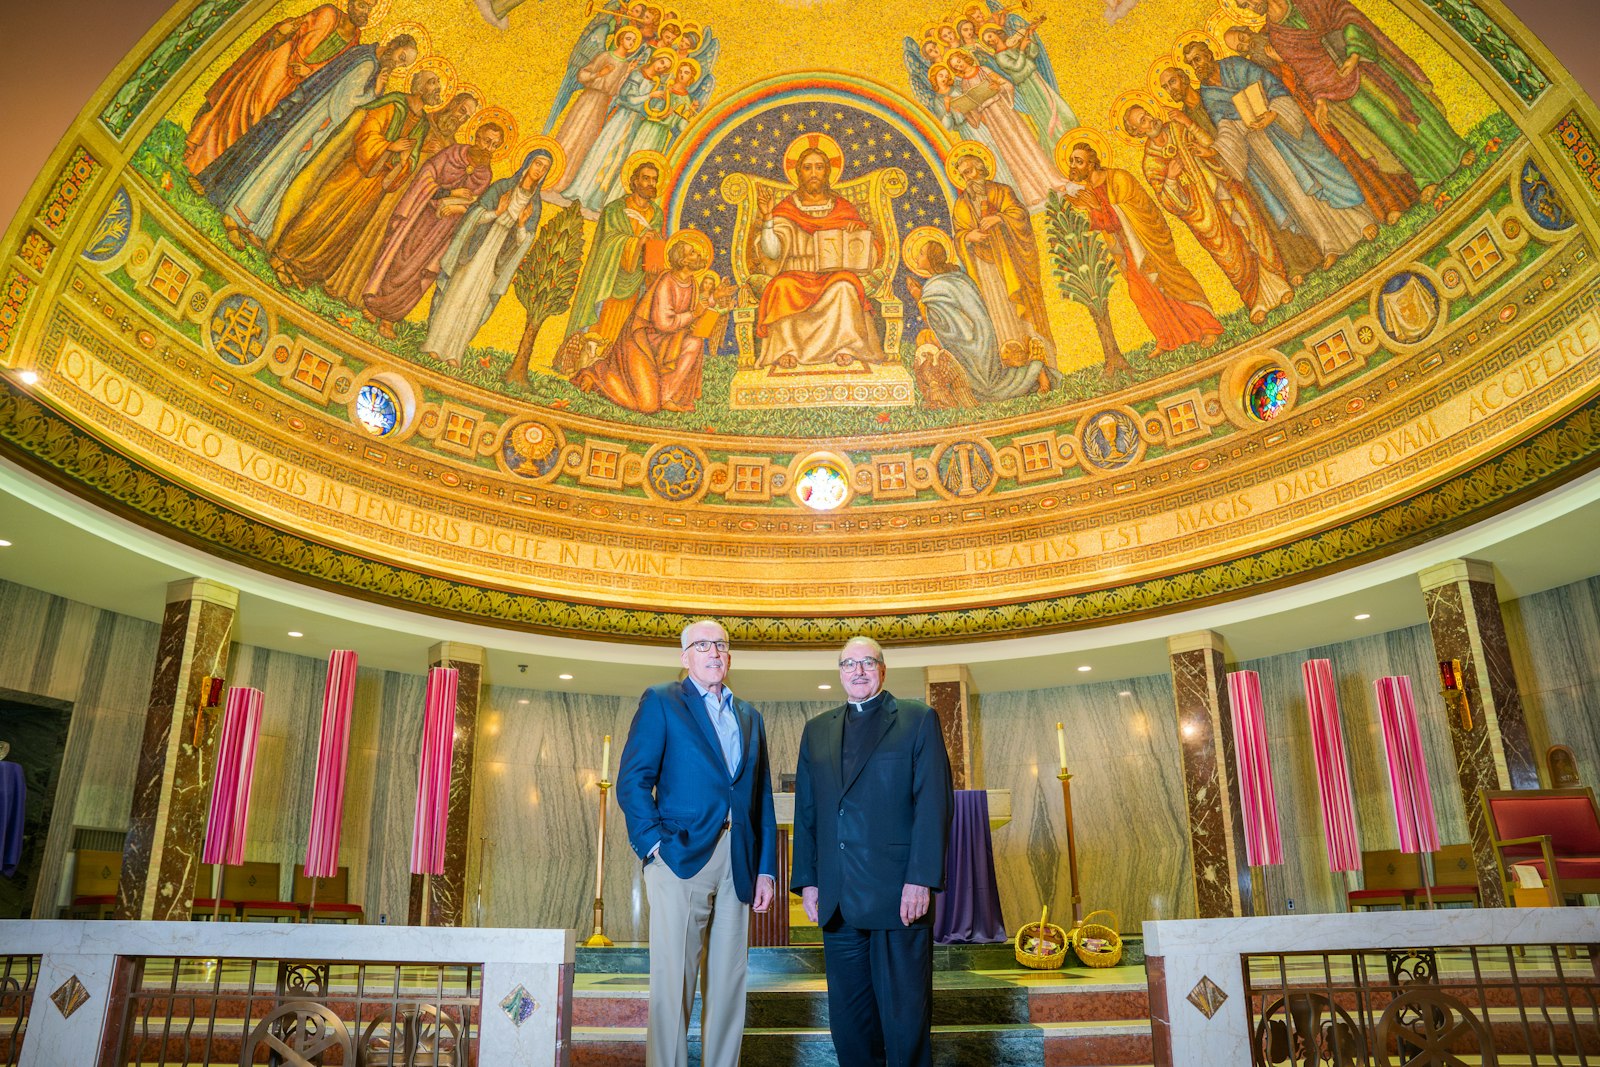 David Smydra, a St. Matthew parishioner, stands with Fr. Duane Novelly before the mosaic that overlooks the church's sanctuary. Smydra worked with Fr. Novelly on completing all the paperwork and procedures necessary to get St. Matthew Parish on the National Register of Historic Places. The two are standing beneath a mosaic crafted by Andrew Maglia. The 1,300-square foot mosaic was especially impressive to the team from the U.S. Department of the Interior that inspected St. Matthew Church during the historic designation process.